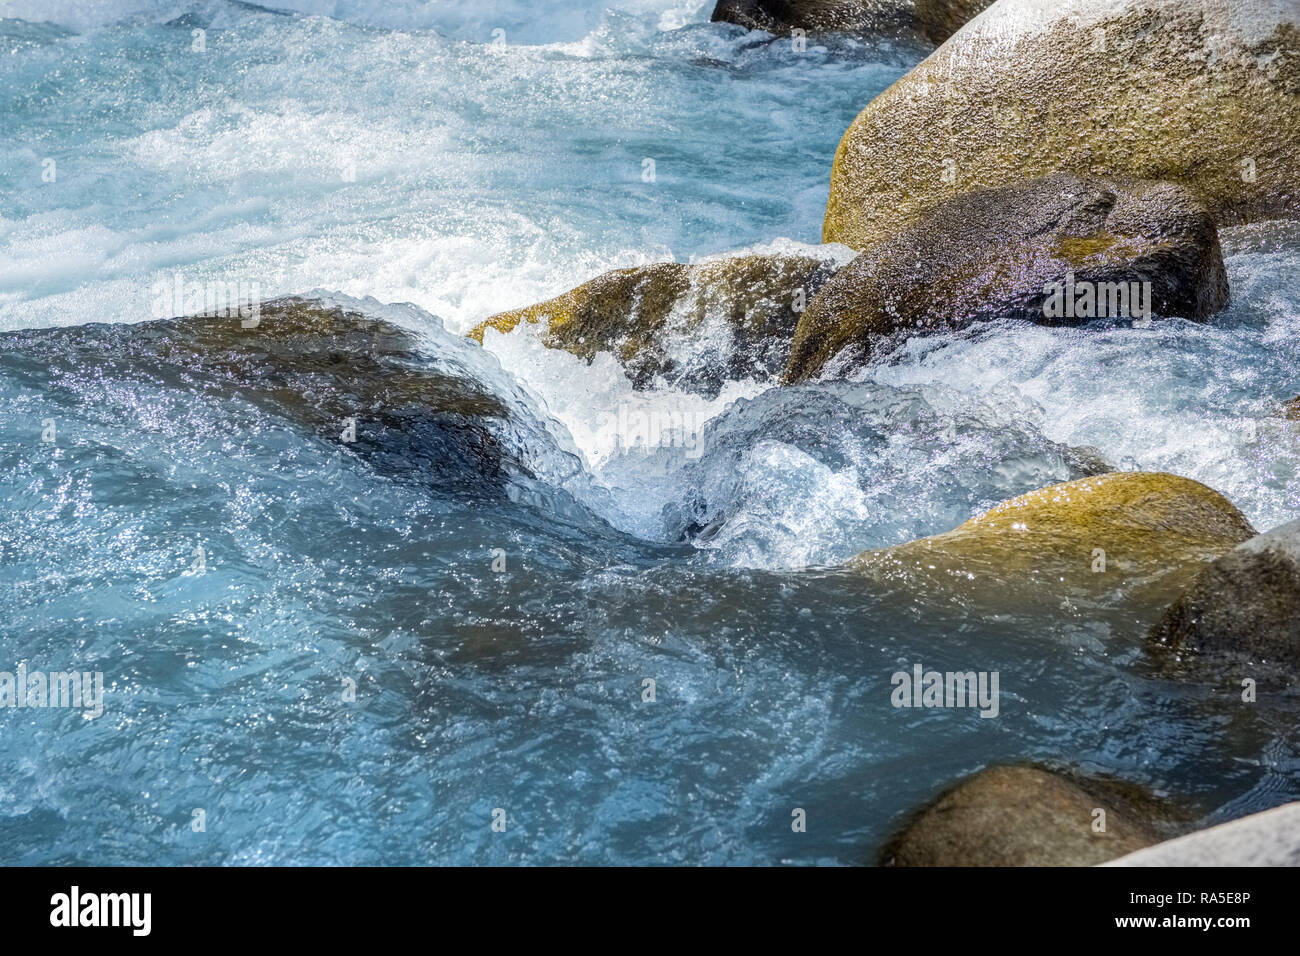 Fast flowing river in the Himalayas Stock Photo